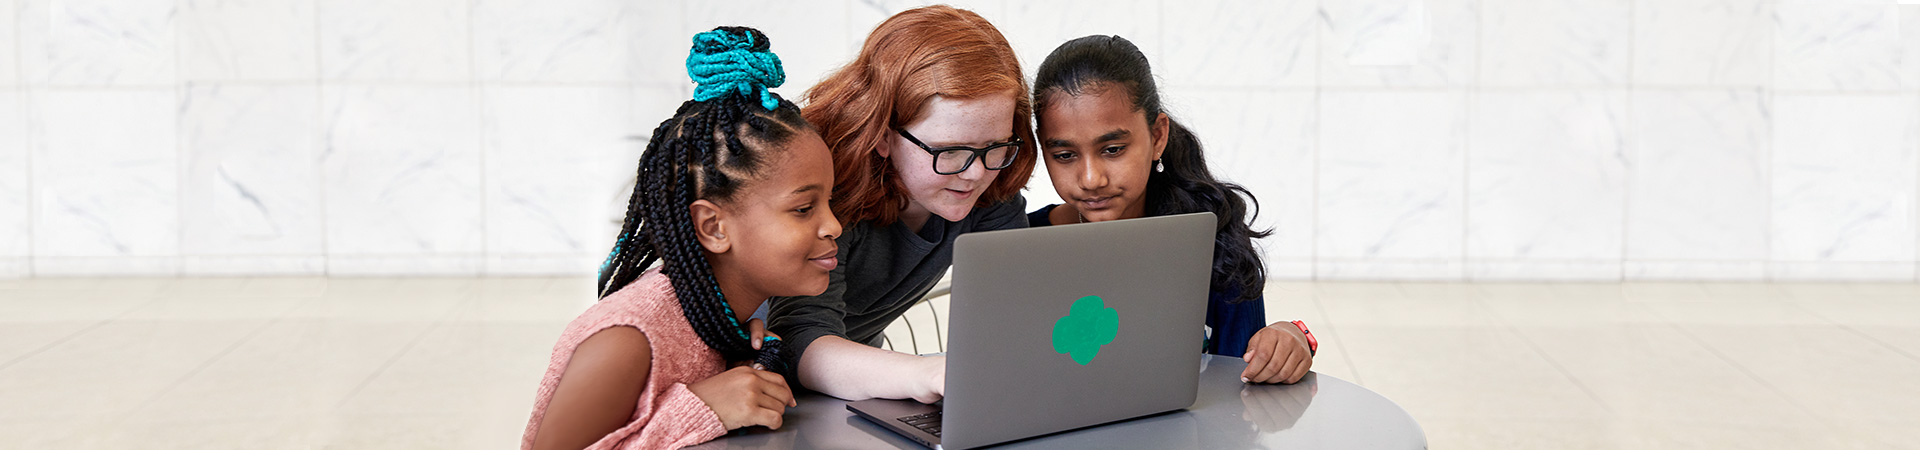  group of girl scouts looking at laptop computer 